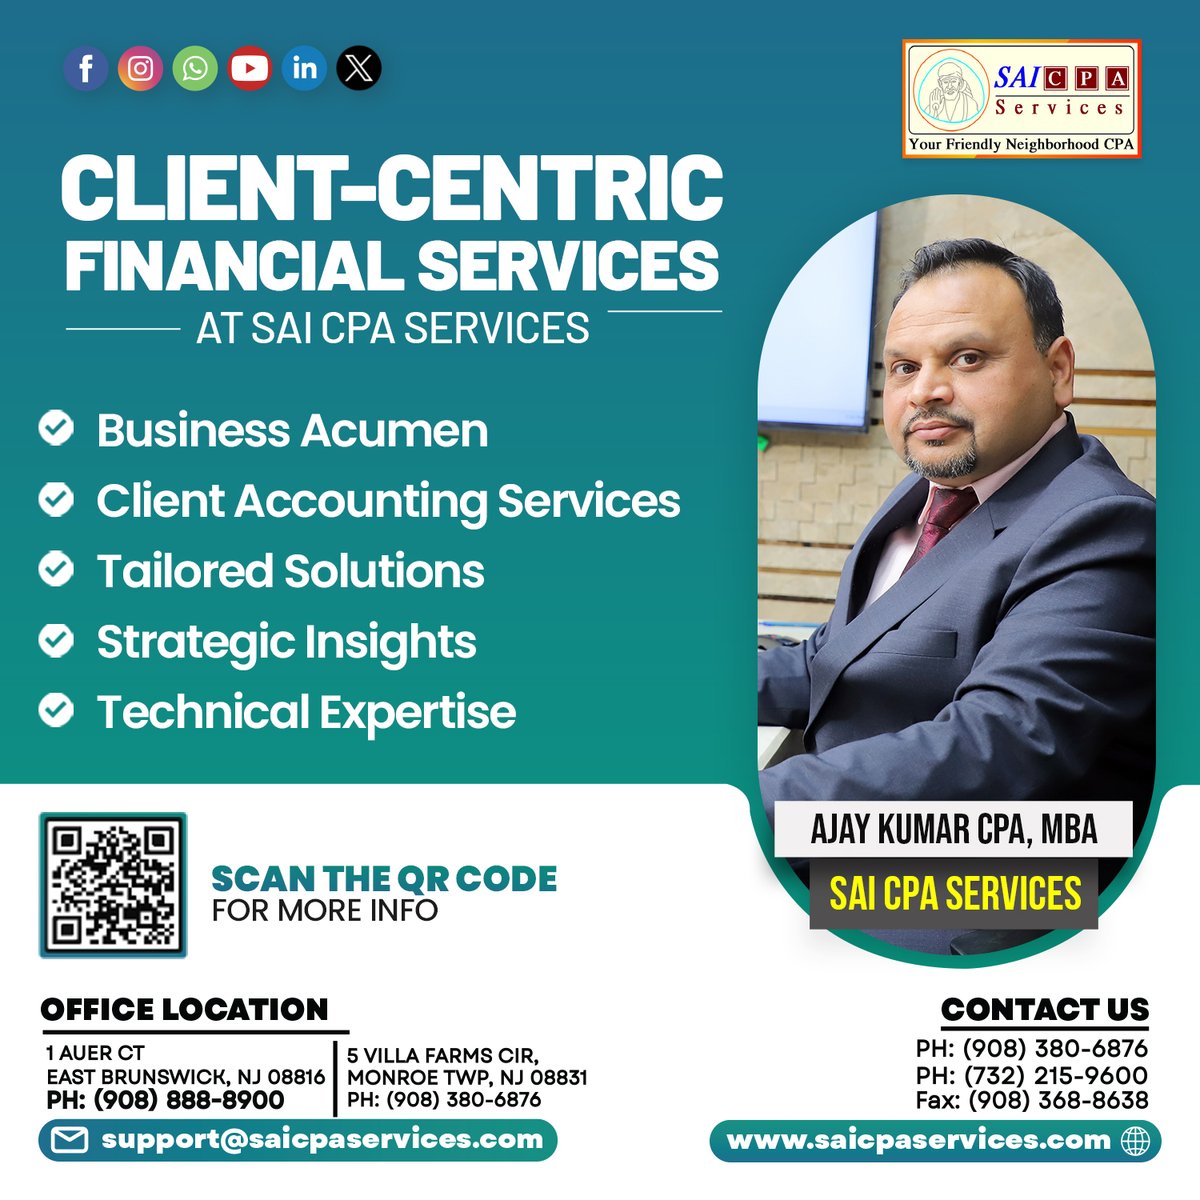 Customized Client-Focused Financial Solutions at SAI CPA Services

Contact Us: saicpaservices.com
(908) 380-6876

#SAICPAServices #ClientCentric #BusinessAcumen #AccountingServices #TailoredSolutions #StrategicInsights #TechnicalExpertise #FinancialServices